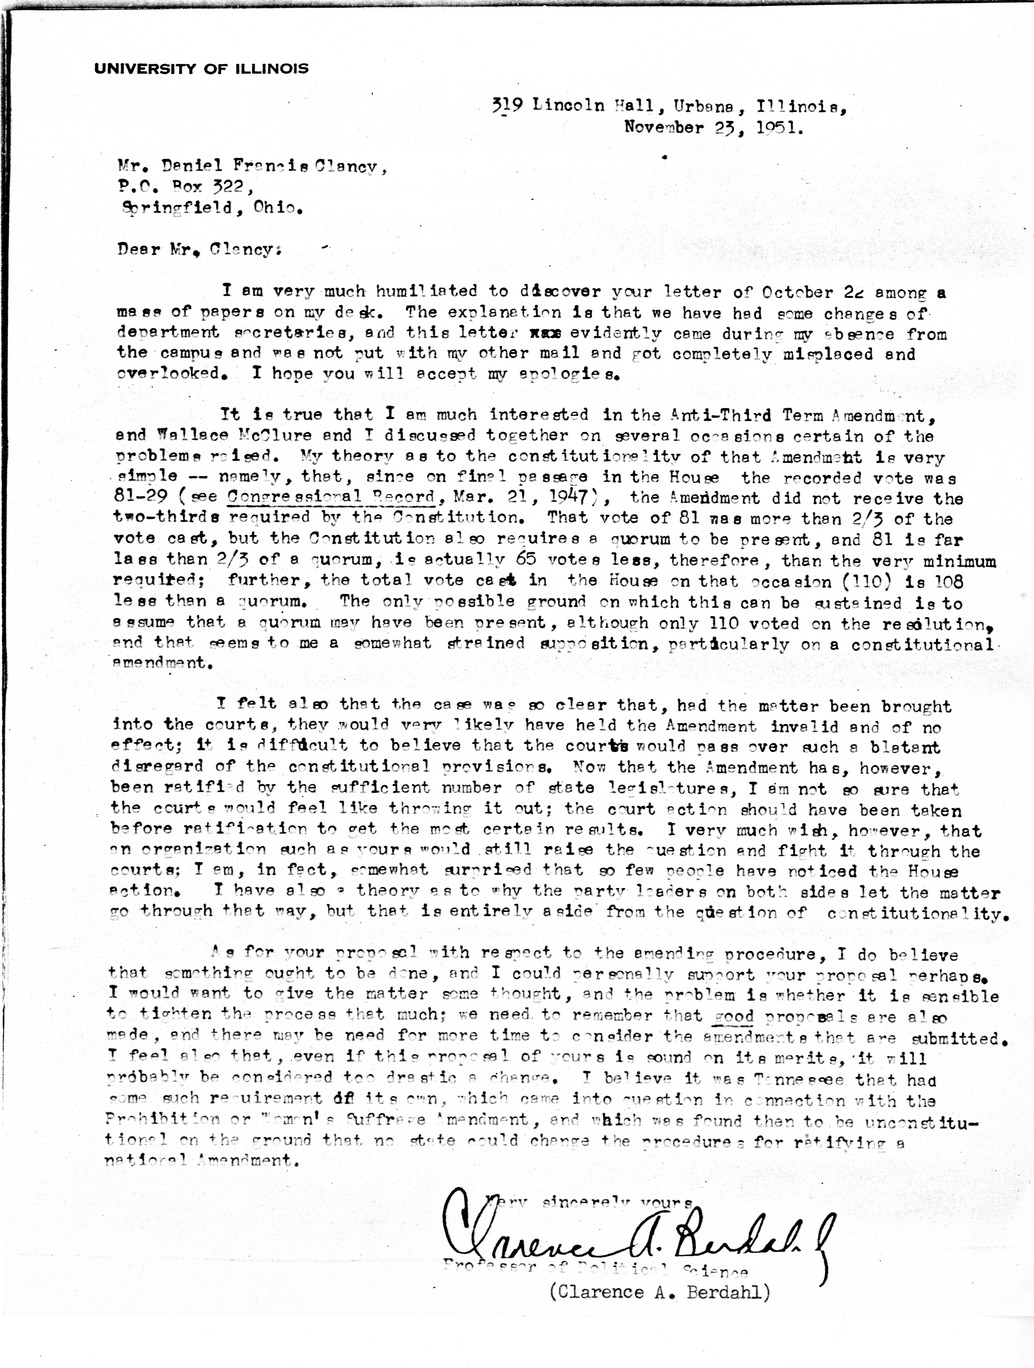 Letter from Clarence A. Berdahl to Daniel F. Clancy